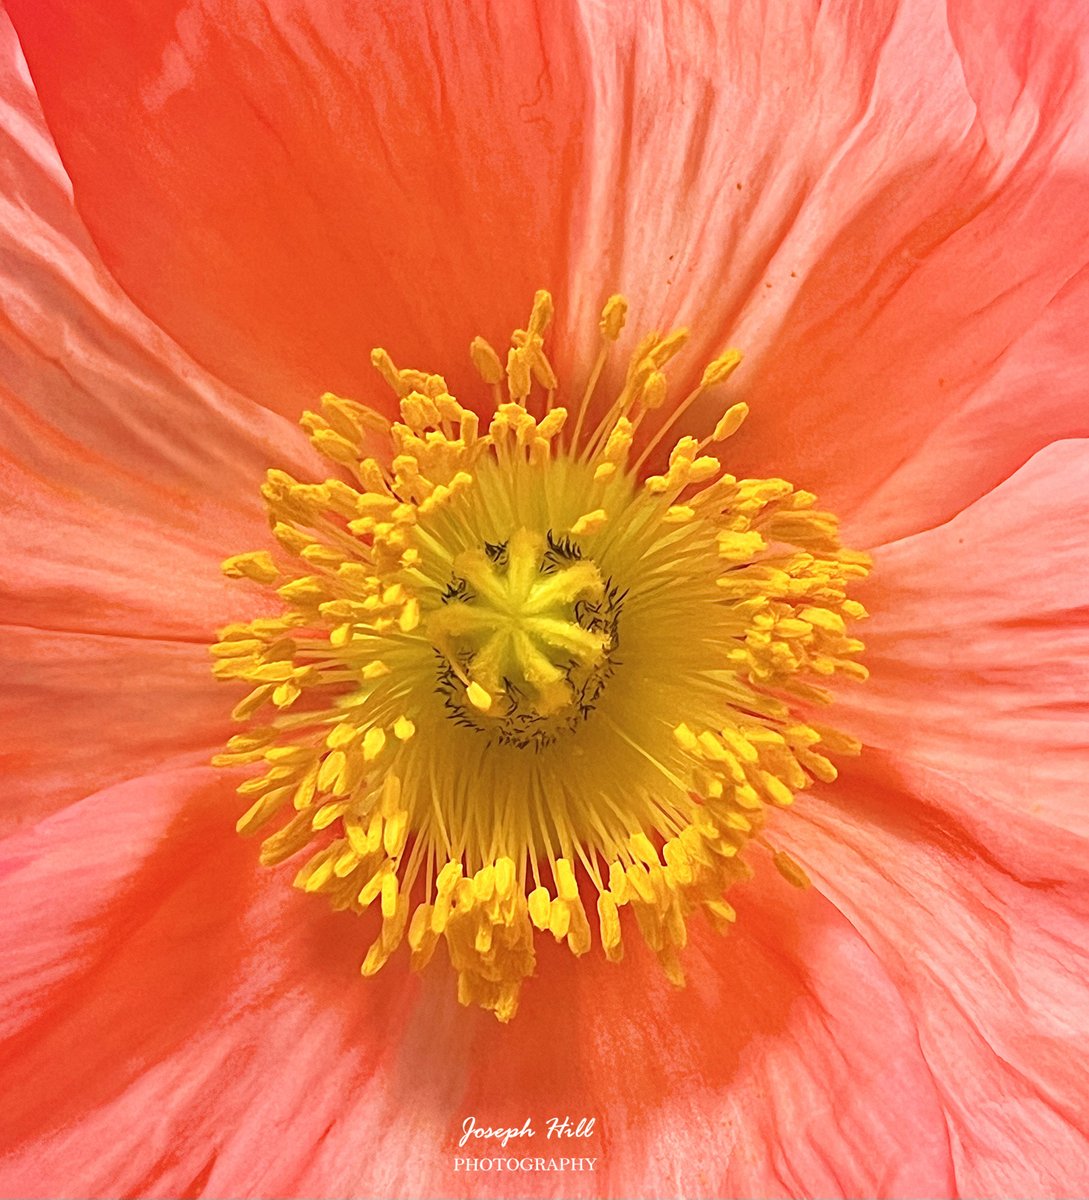 Poppy🌼
Photo By: Joseph Hill🙂📸🌼

#Poppy🌼 #Flower #nature #spring #beautiful #colorful #Peaceful #flowerphotography #SouthernPinesNC #April